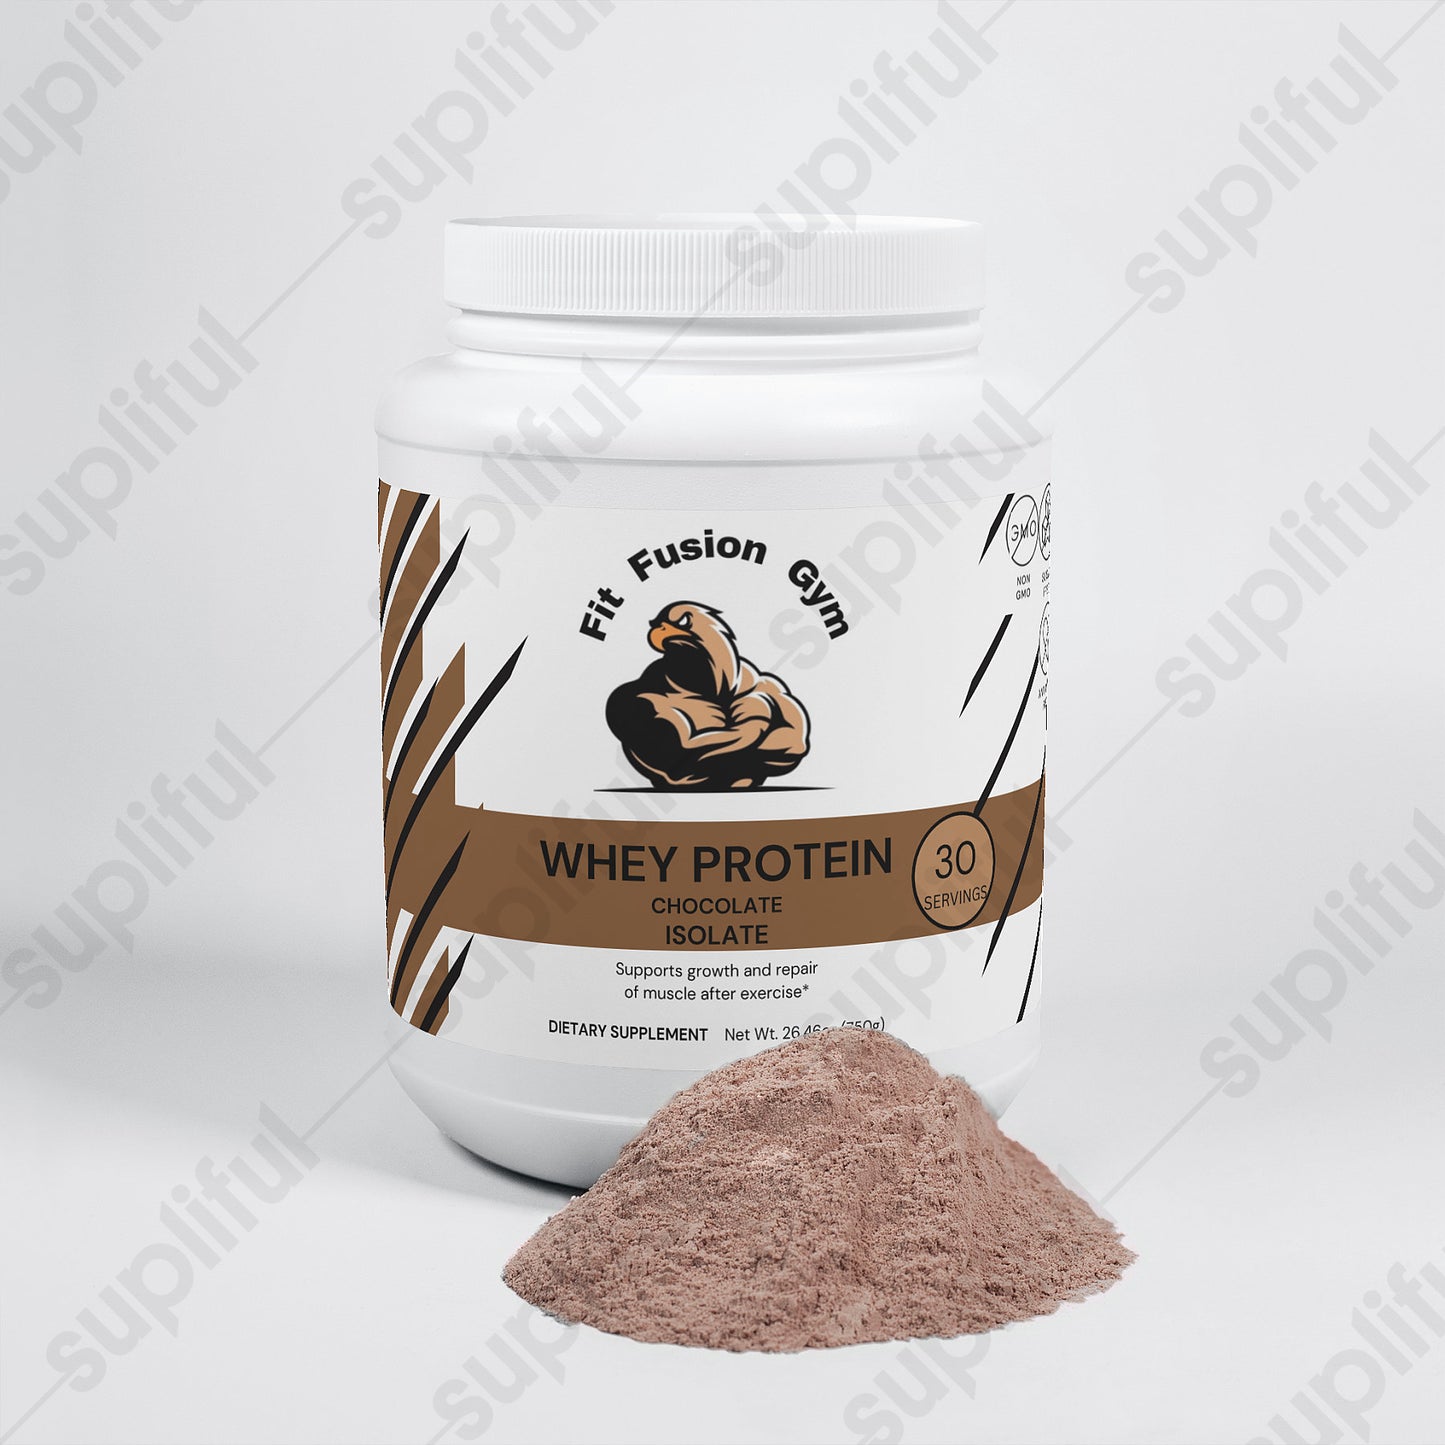 Whey Protein Isolate (Chocolate) for Before and After the Gym (Gym Supplement)